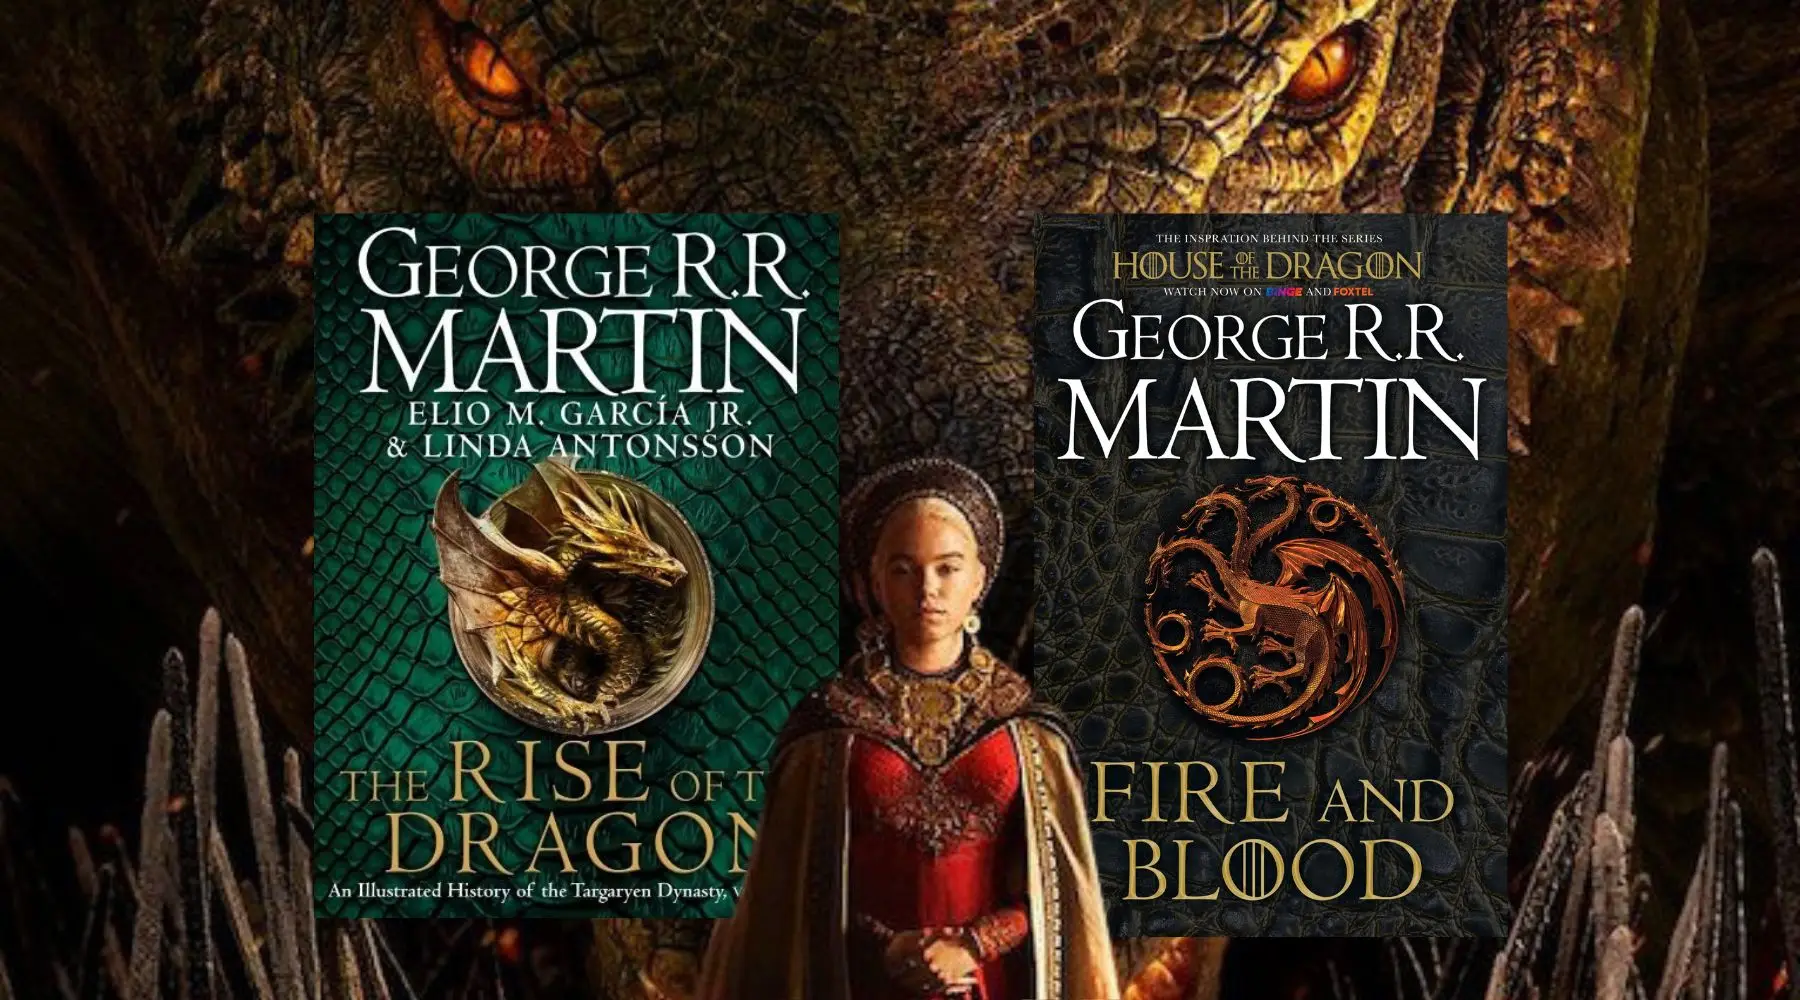 The Rise of the Dragon: An Illustrated History of the Targaryen Dynasty,  Volume One (The Targaryen Dynasty: The House of the Dragon) See more